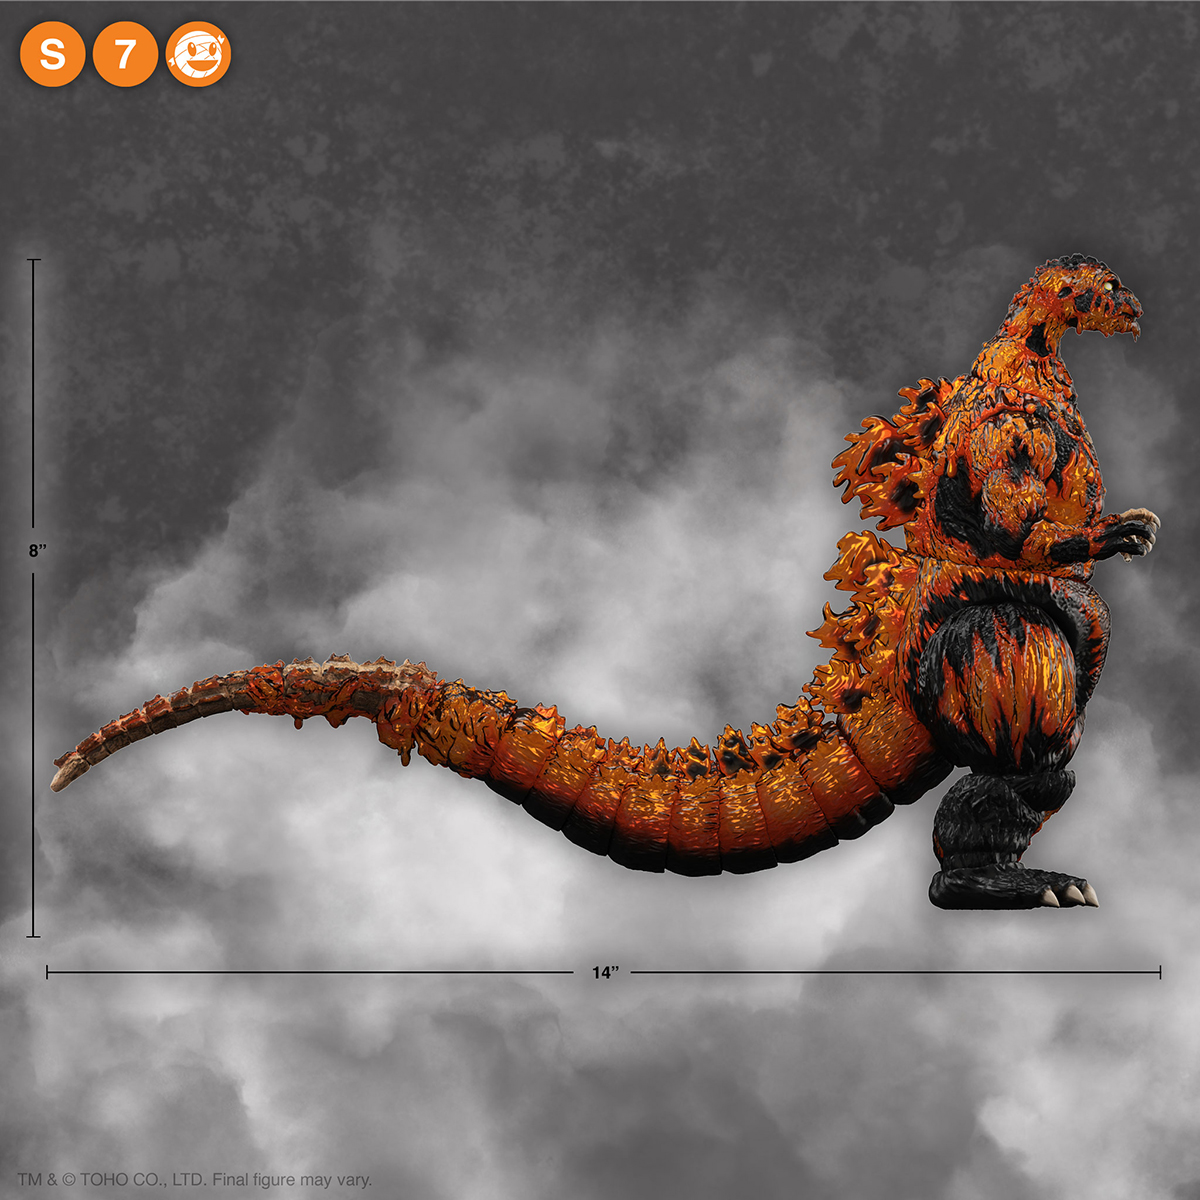 The King of Monsters has faced dire circumstances before, but its clash with Destoroyah looks like it may his final undoing! At over 8” tall and 14” wide, this Toho ULTIMATES! 1200°C Godzilla figure is available for pre-order on Super7.com until Godzilla Day (11/3)!